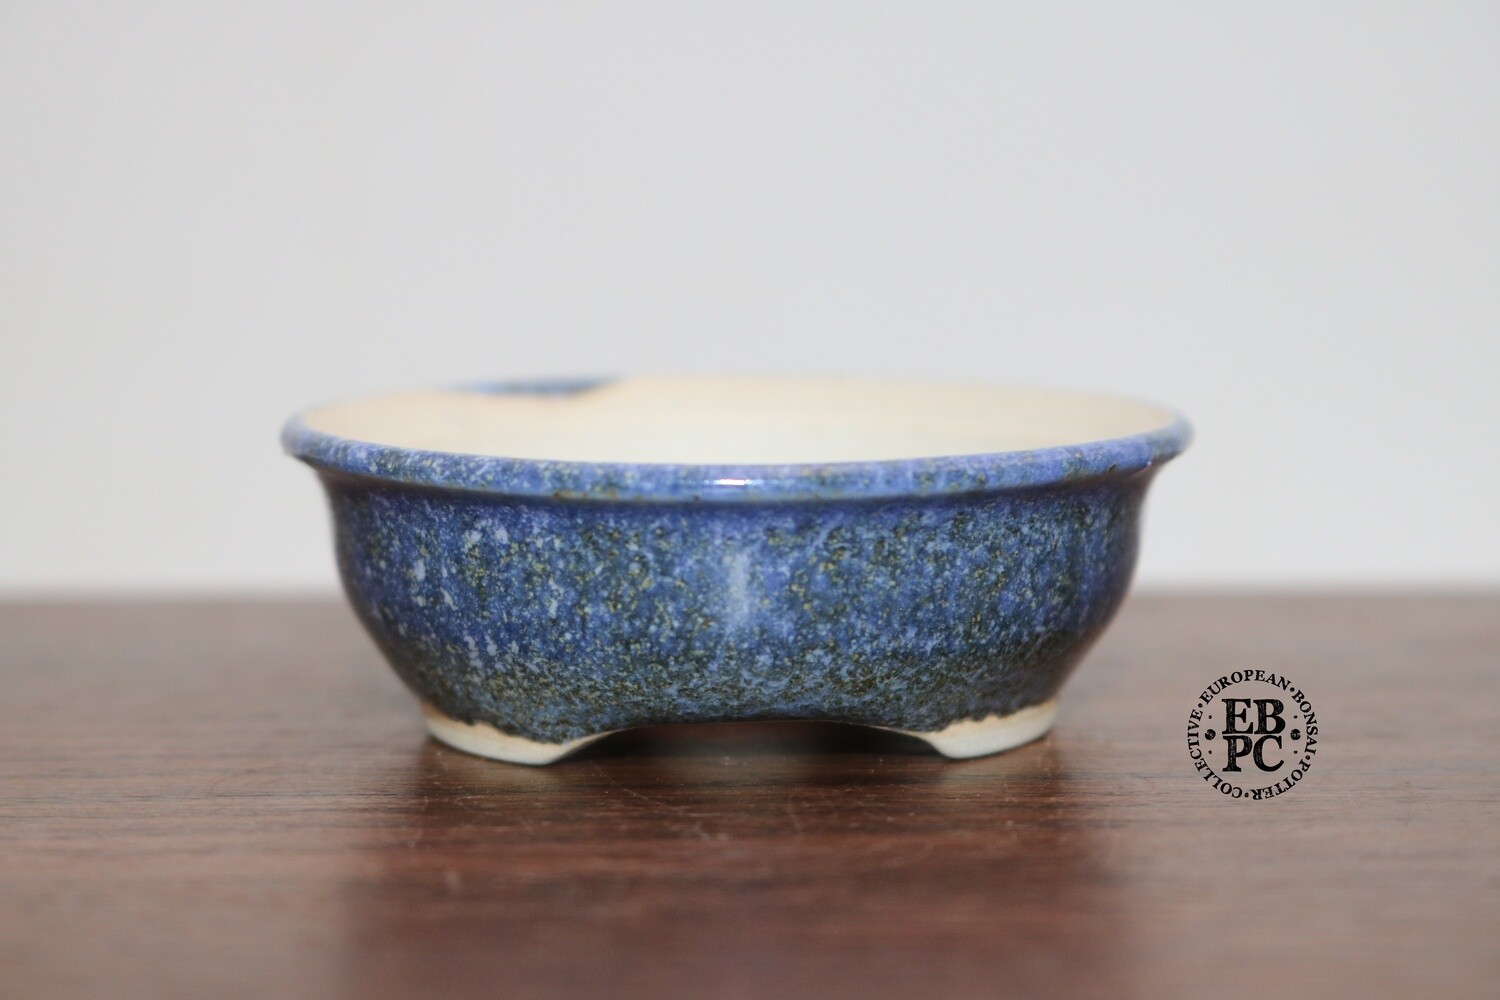 SOLD - PAS Pots - 7.2cm Round; Mame / Accent pot; Hand Thrown; Namako-esque Glaze; Blues, Browns, Cream; Detailed foot ring; Patricia